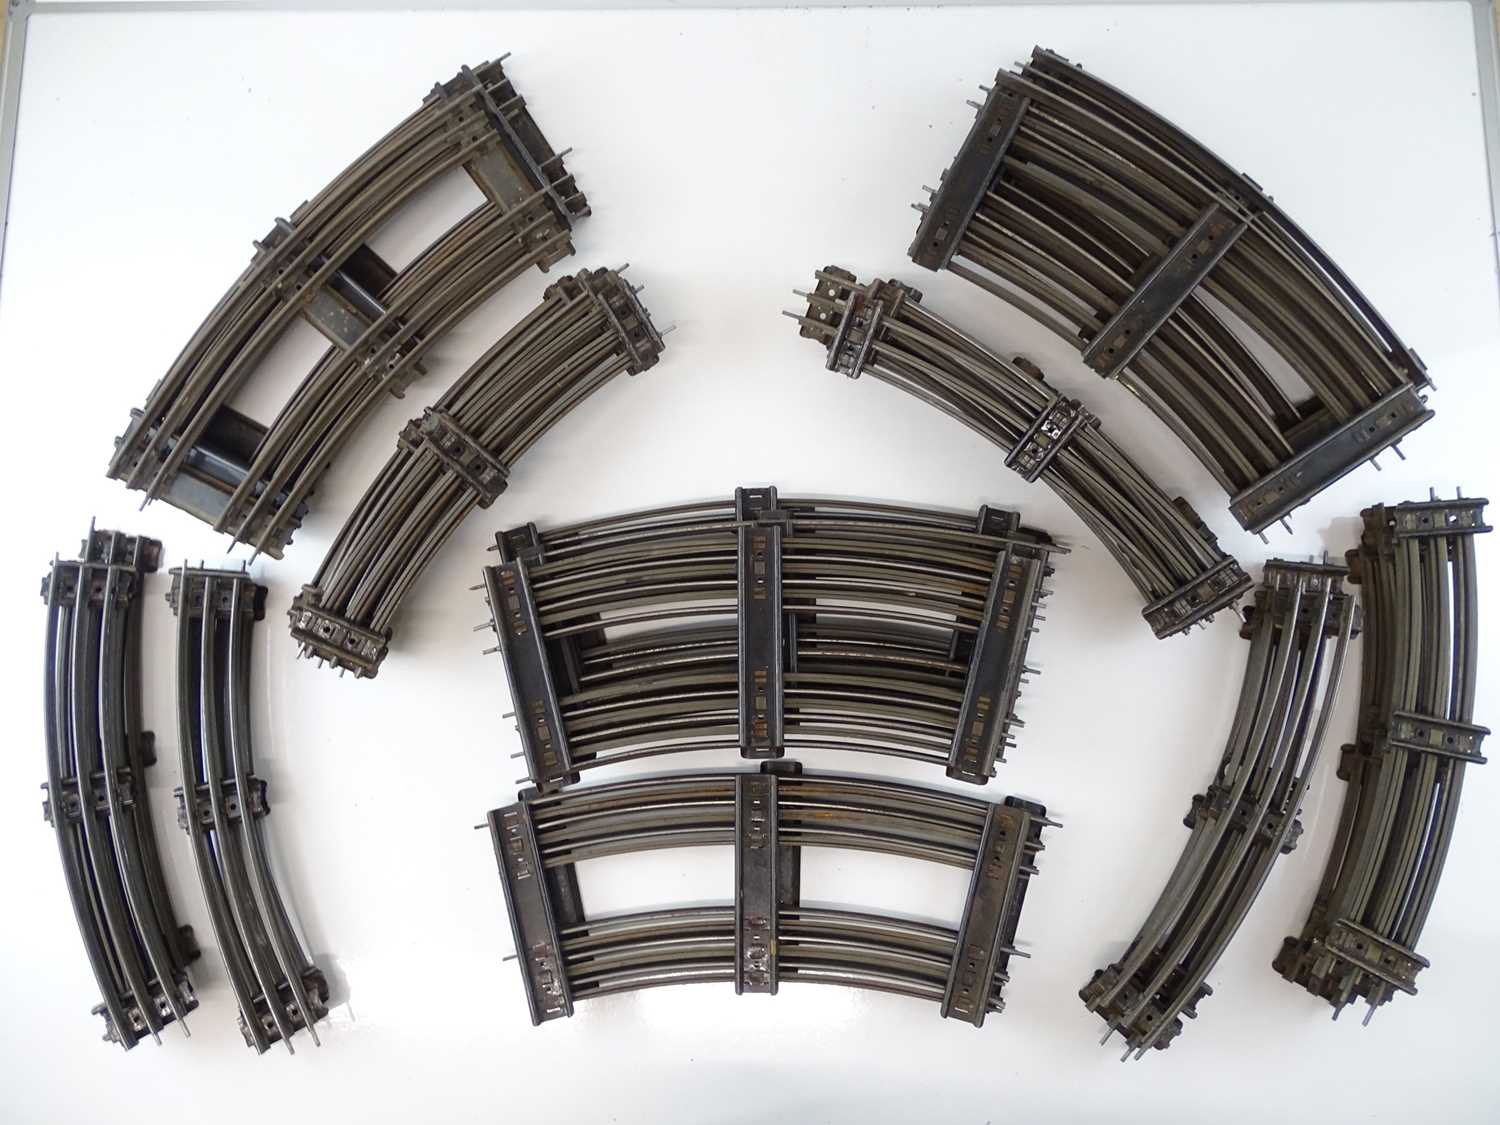 A large quantity of HORNBY SERIES O Gauge 3-rail track all curves - some double track sections and